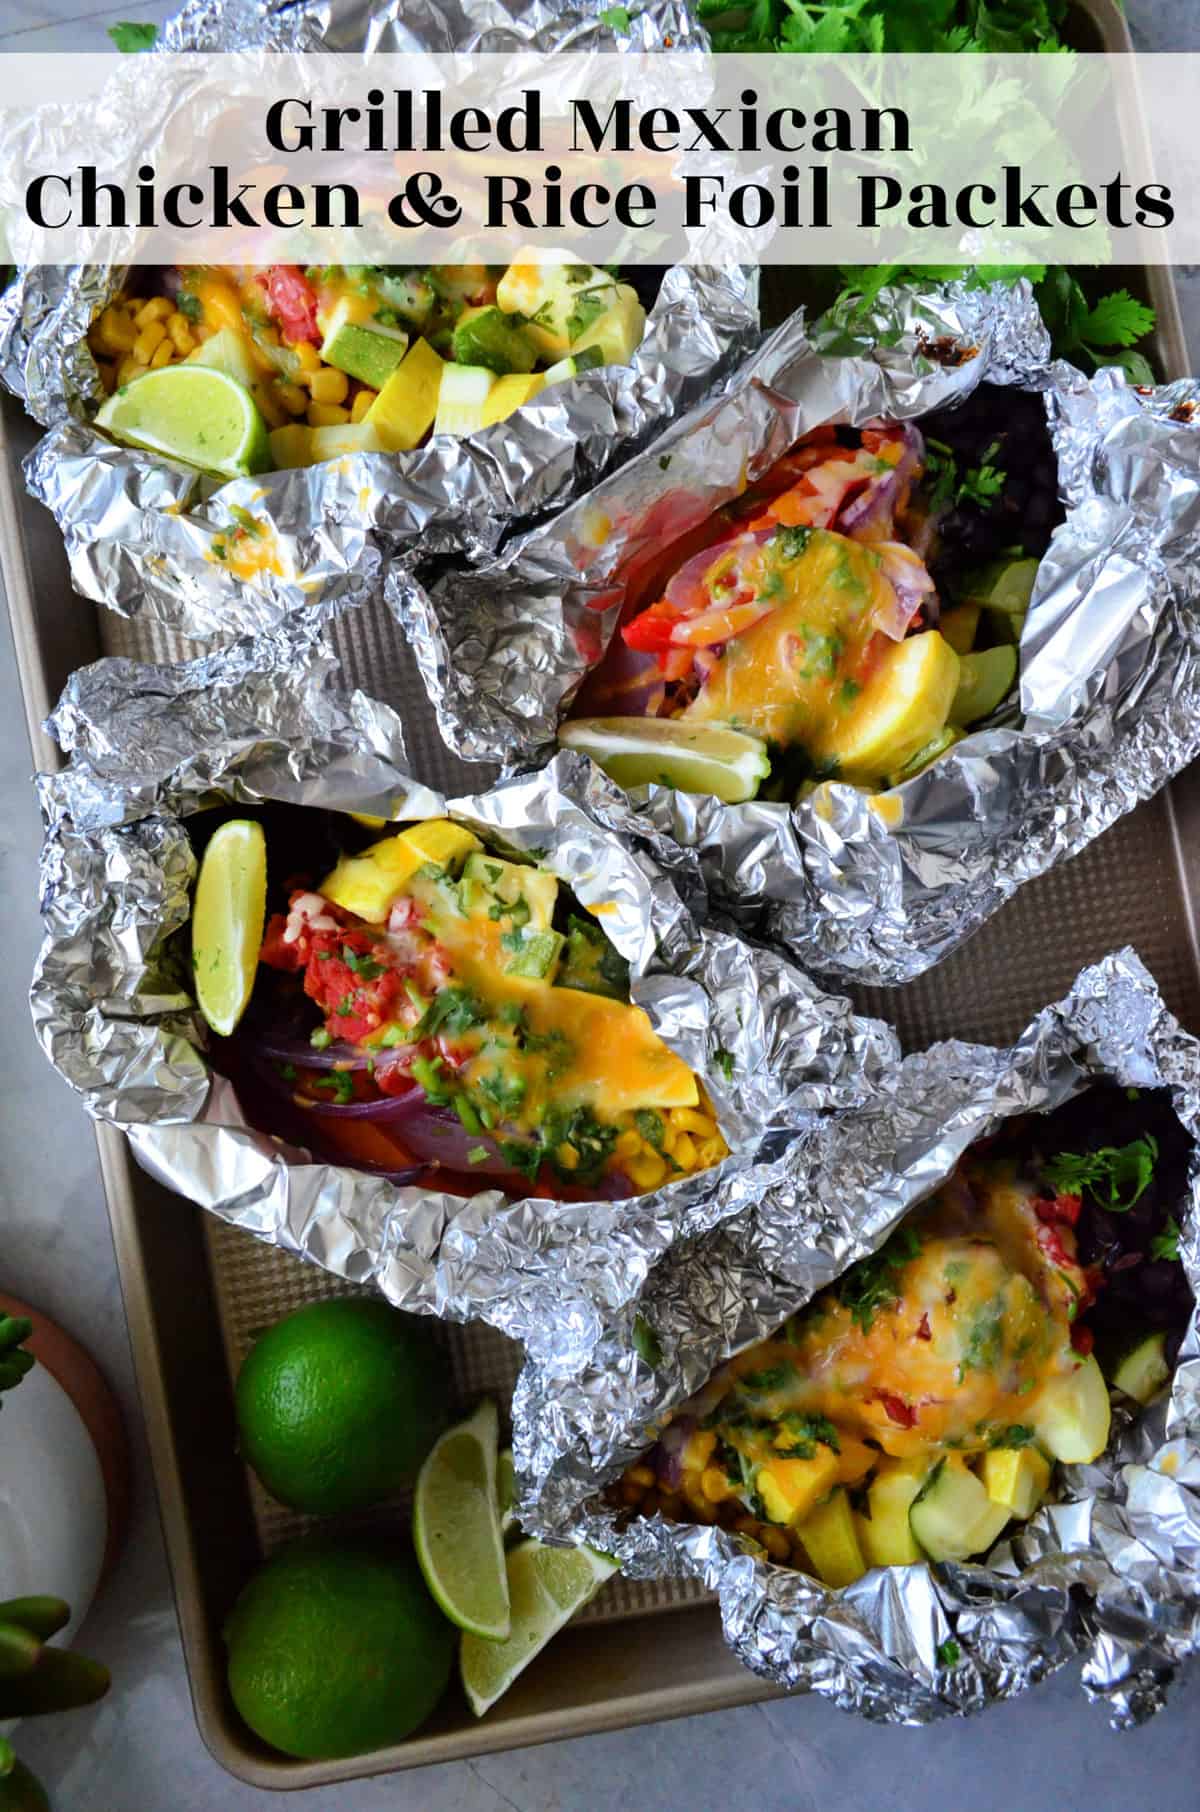 4 aluminum foil packets containing grilled mexican chicken and rice ingredients with pinterest title text.